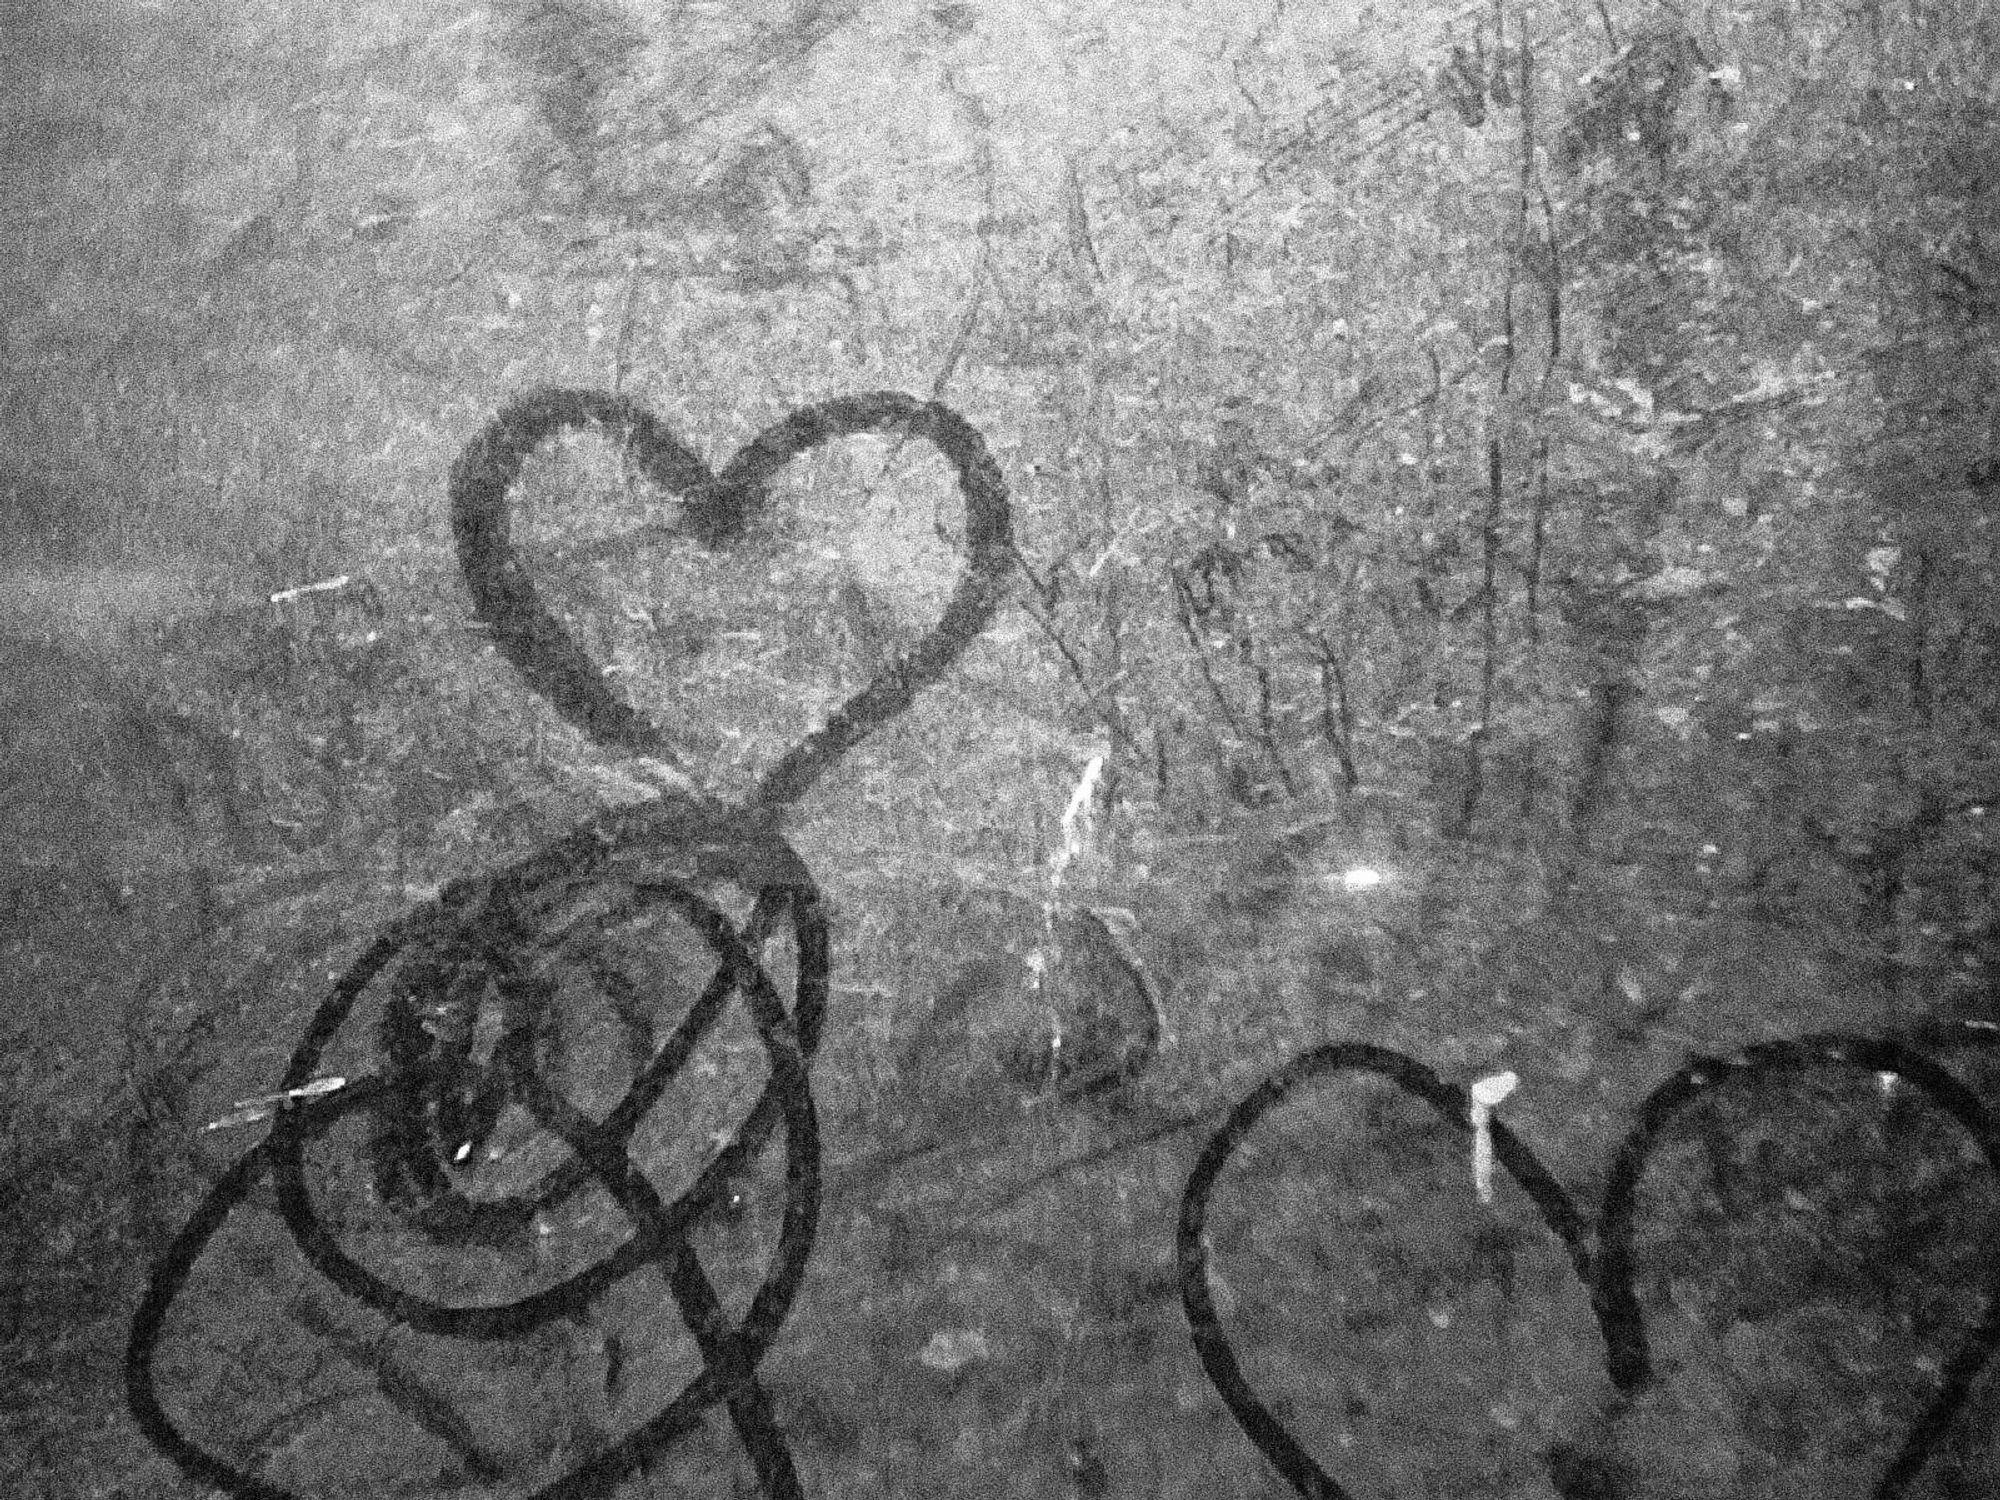 Hearts drawn on a weathered, textured surface with abstract shapes and lines around them.